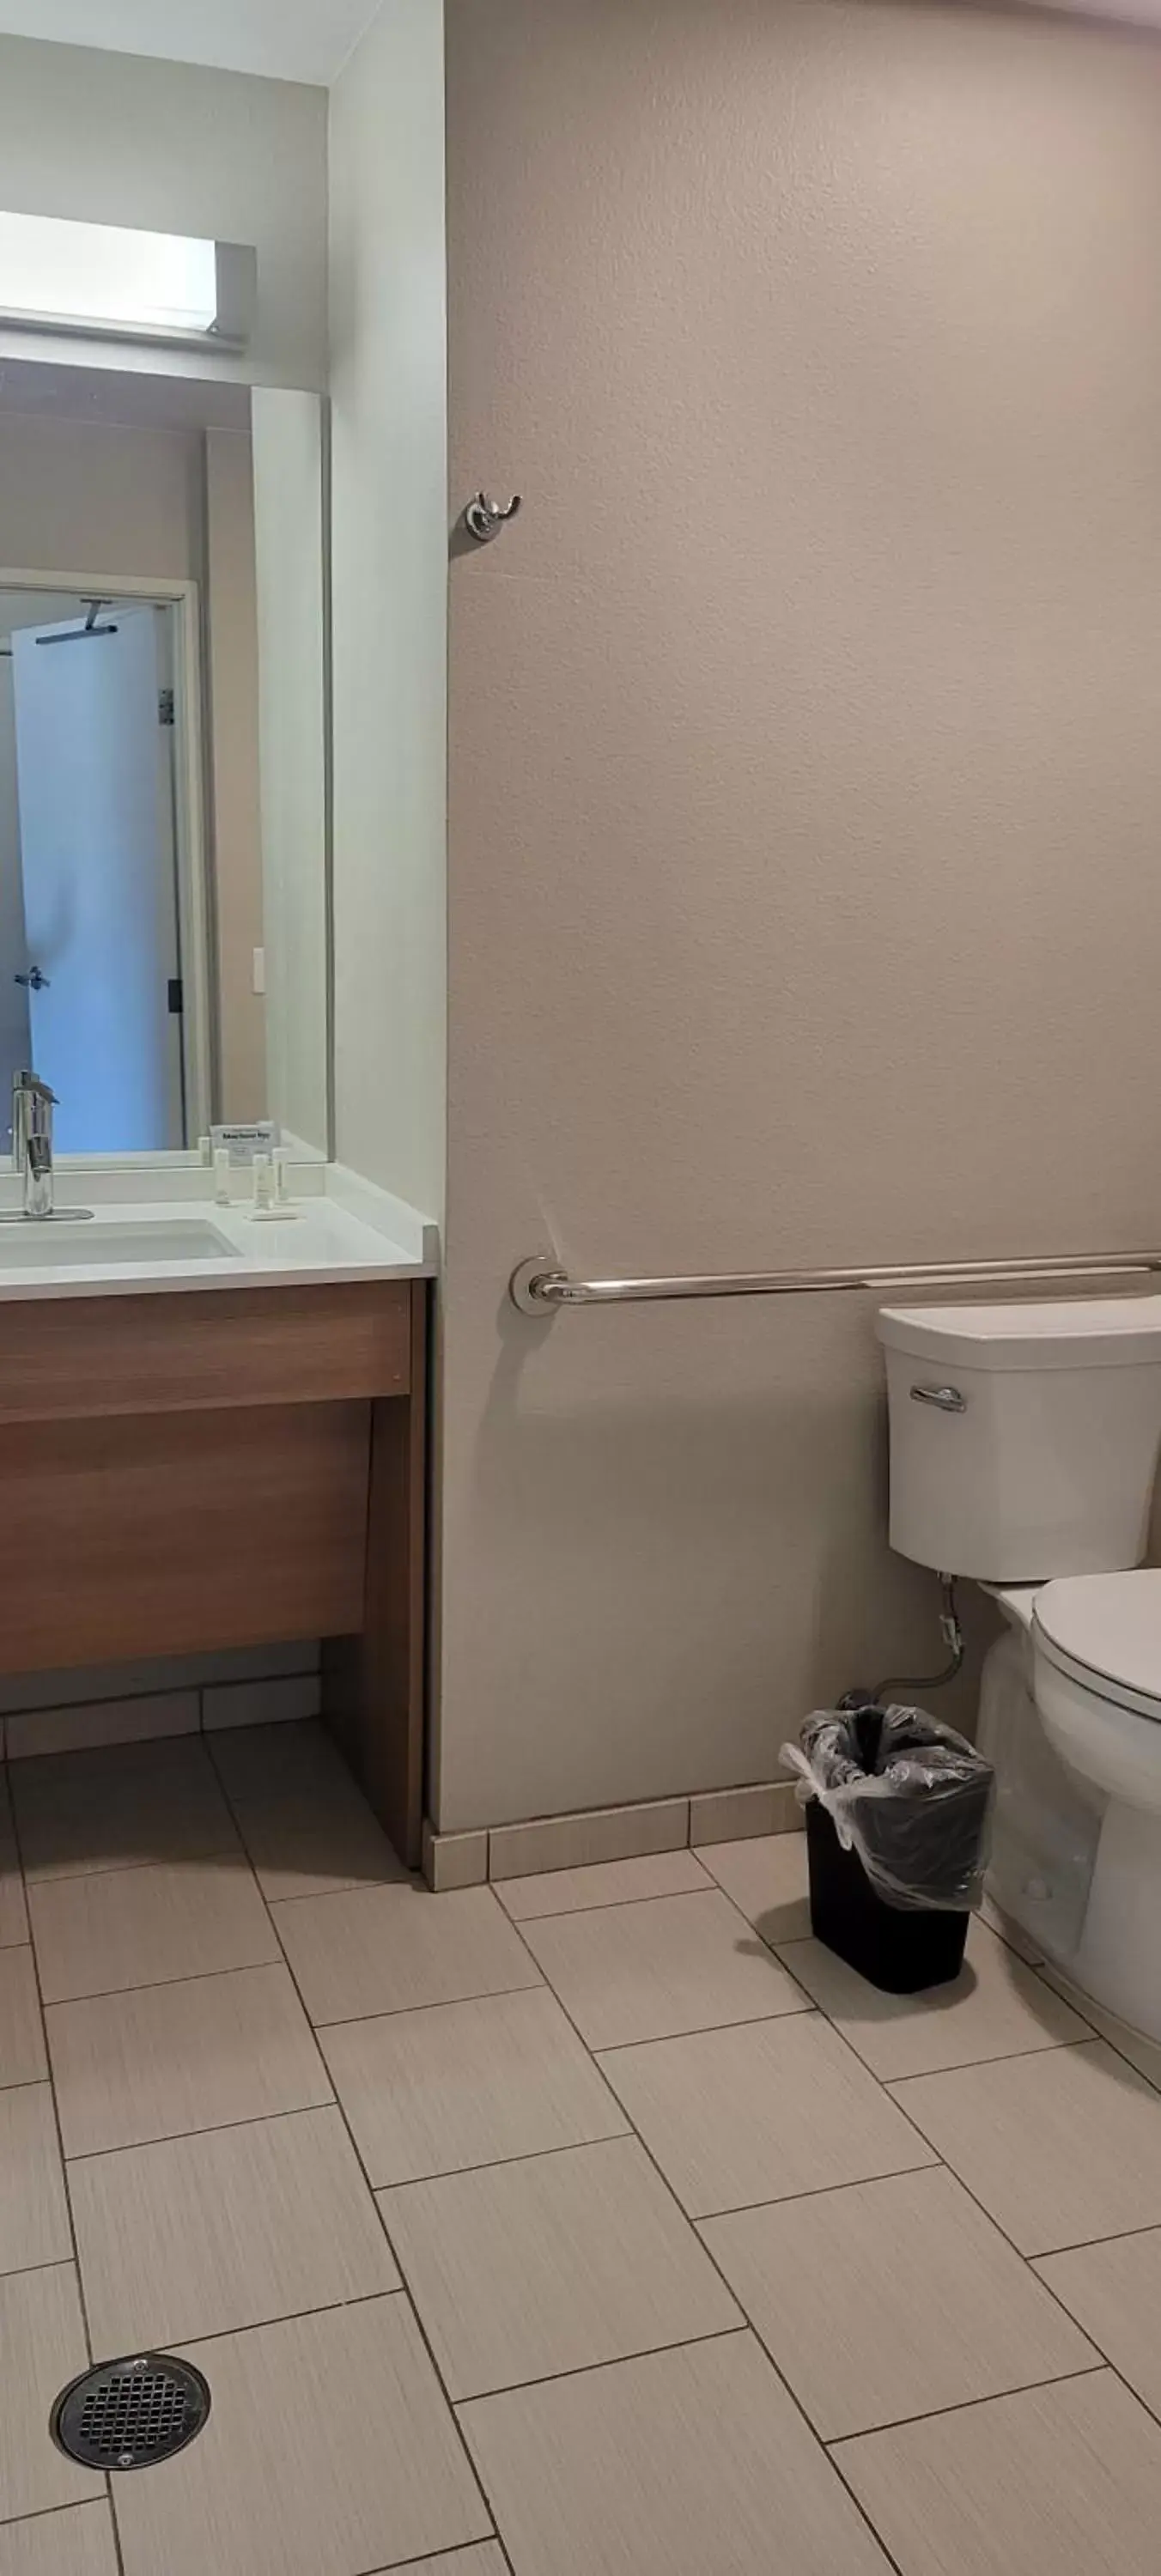 Toilet, Bathroom in Microtel Inn & Suites by Wyndham Fountain North